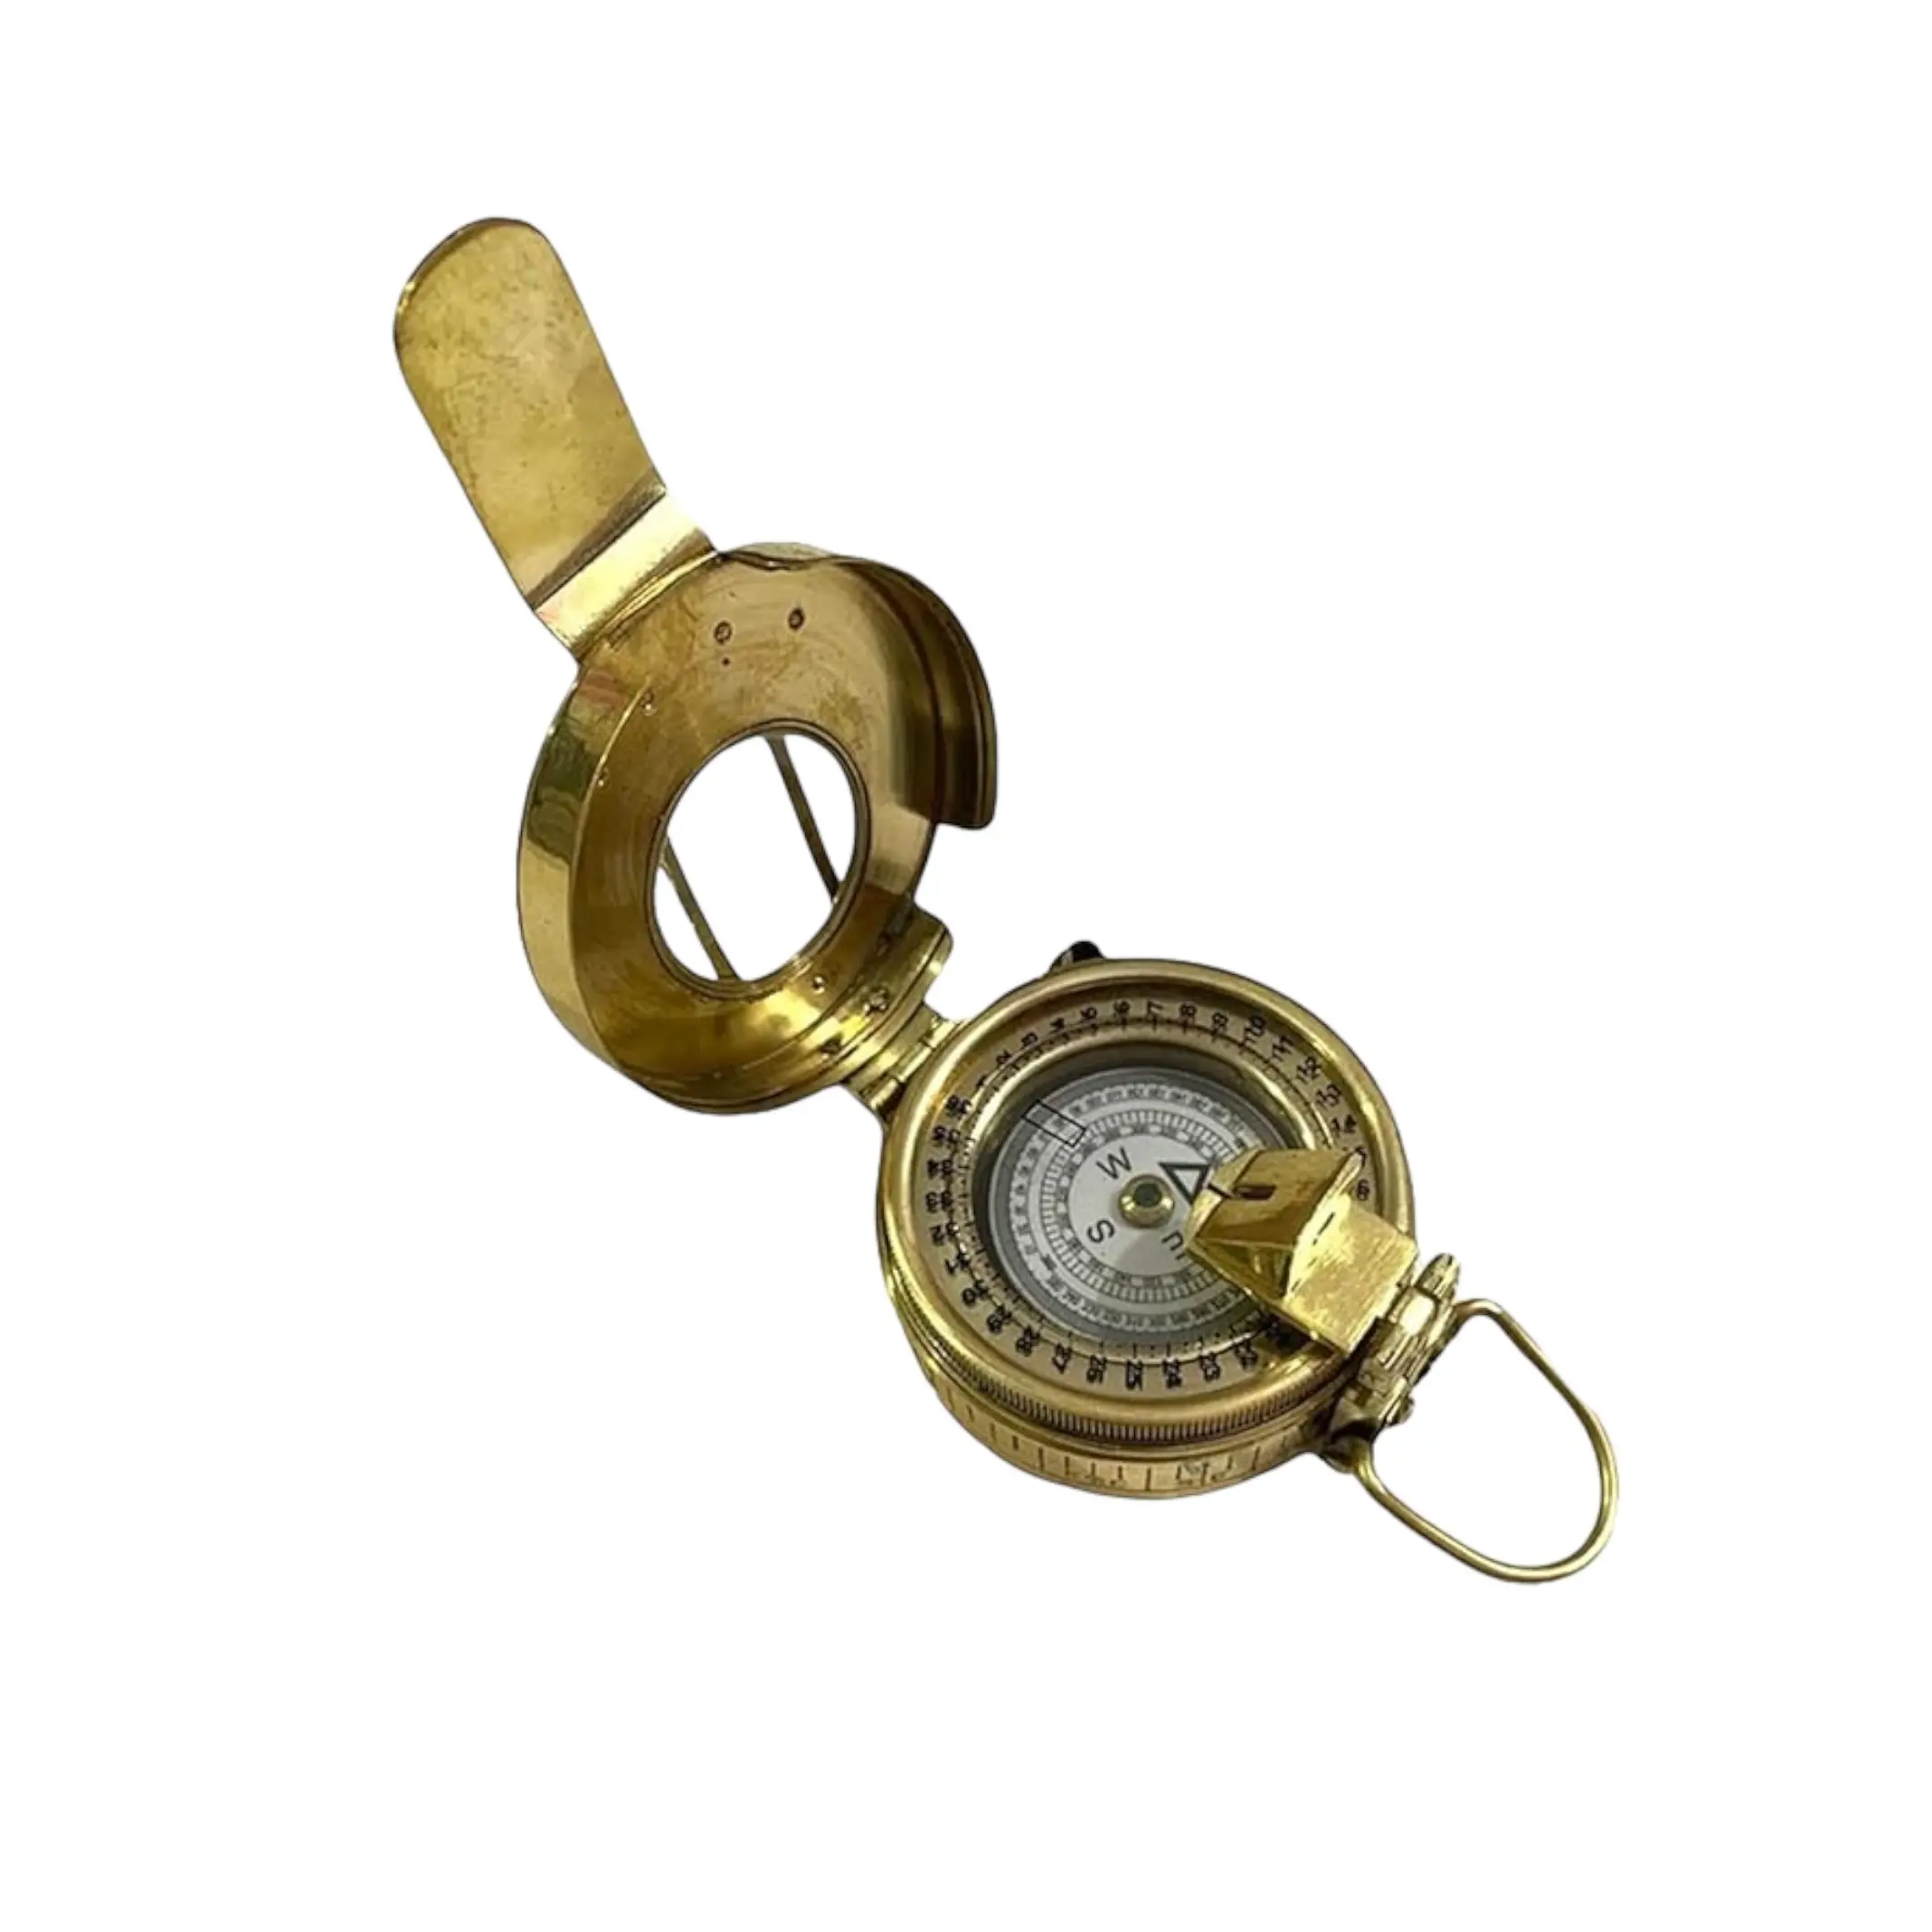 Top Selling Nautical Solid Brass Compass Handmade Pocket Compass Collectible Item from Indian Exporter